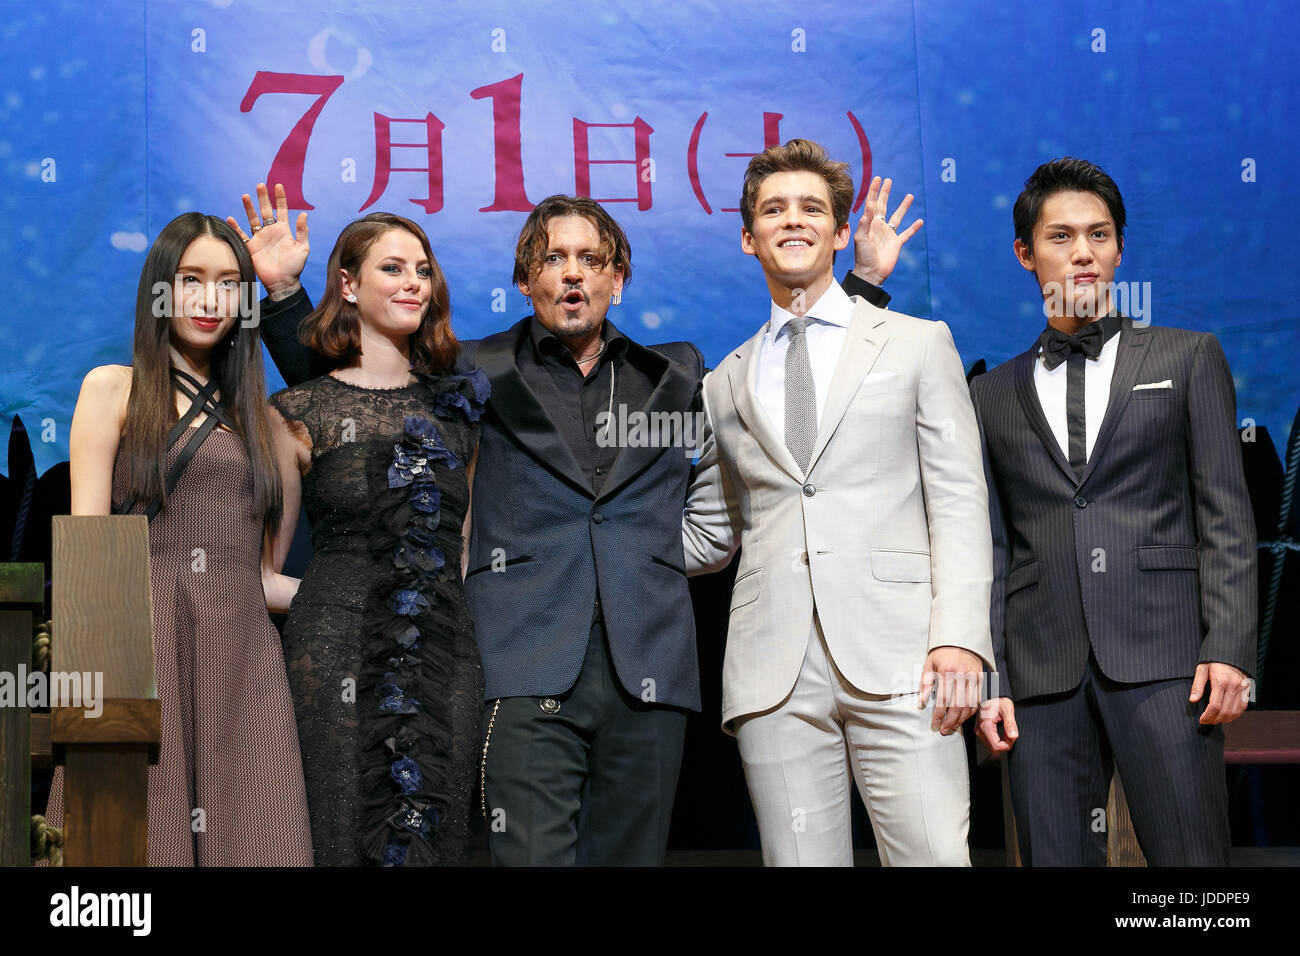 Tokyo, Japan. 20th June, 2017. (L to R) Japanese actress Chiaki Kuriyama, actress Kaya Scodelario, actor Johnny Depp, actor Brenton Thwaites and Japanese actor Taishi Nakagawa, pose for cameras during the premiere for the film Pirates of the Caribbean: Dead Men Tell No Tales on June 20, 2017, Tokyo, Japan. Depp appeared alongside actors Brenton Thwaites and Kaya Scodelario at the premiere for Pirates of the Caribbean: Dead Men Tell No Tales. The fifth installment to the hit series opens on July 1 in Japan. Credit: Aflo Co. Ltd./Alamy Live News Stock Photo